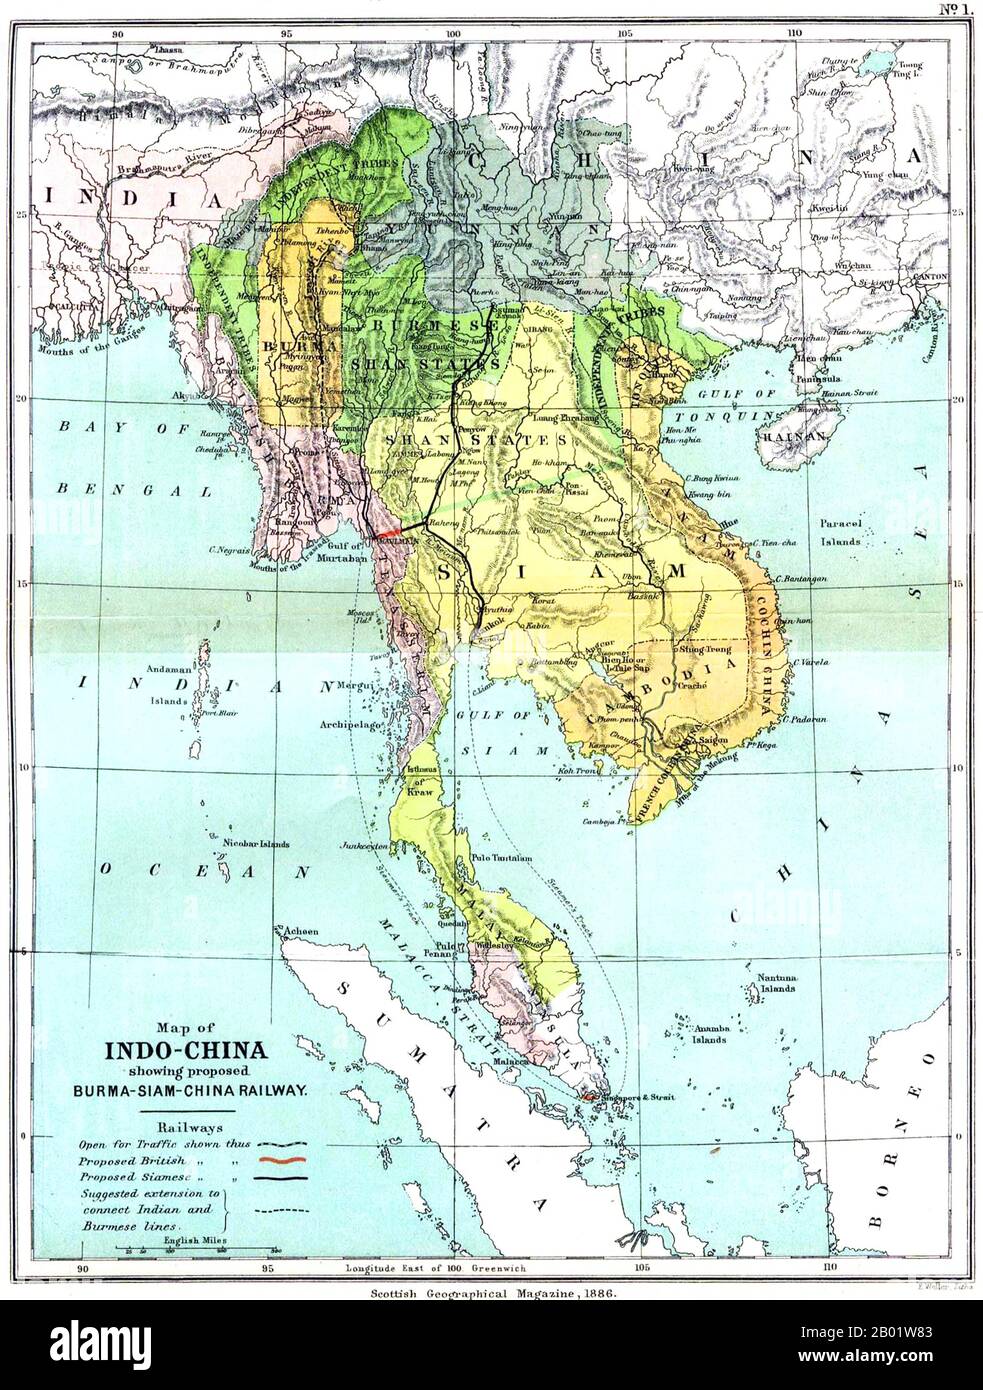 Southeast Asia: A UK (Scottish Geographical Magazine) map of Greater Indochina and the Malay Peninsula, 1886.  A detailed and remarkably accurate map of Burma, Siam, Vietnam, Cambodia and Malaya dating from 1886 and showing the rectangle of independent Burma around Mandalay - which was losing its independence to Great Britain in 1885-1886 when the map was published. The Burmese Shan States are shown as under Burmese influence (shortly to be replaced by that of Great Britain). Stock Photo